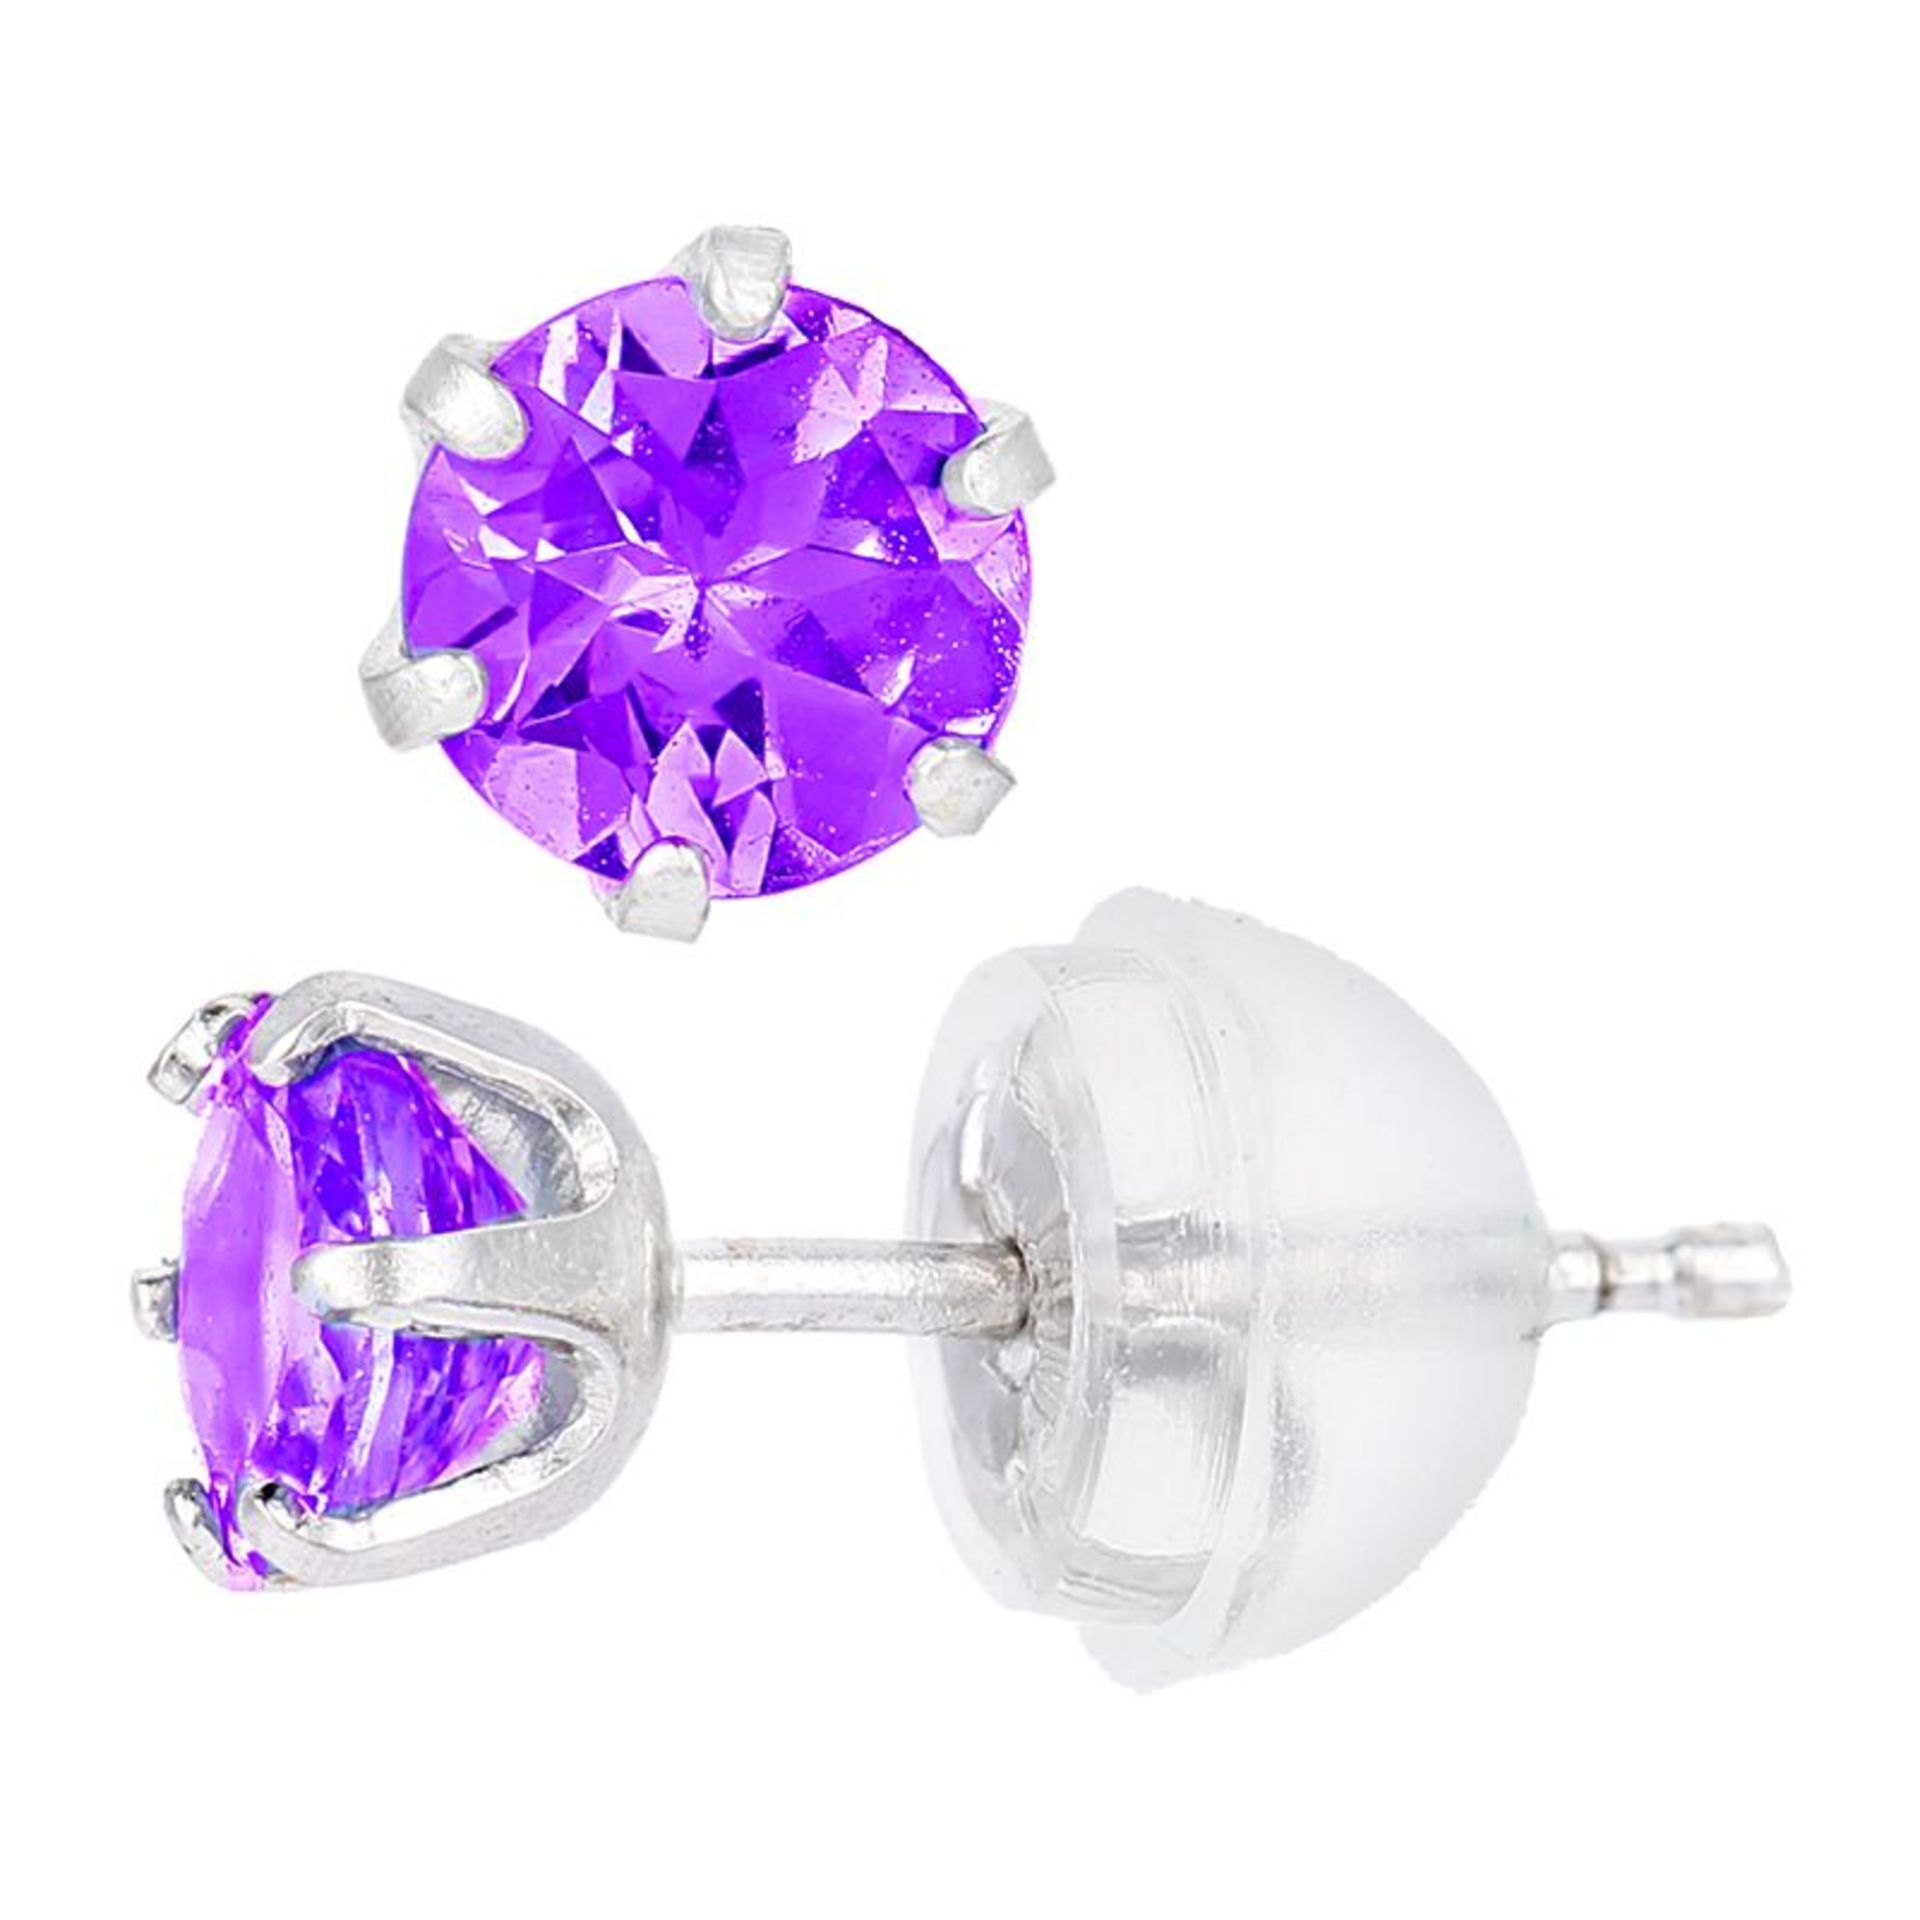 Amethyst earrings in platinum, Metal Platinum 900, Weight 0.59, RRP £234.99 (1a863idsu am) - Image 3 of 3